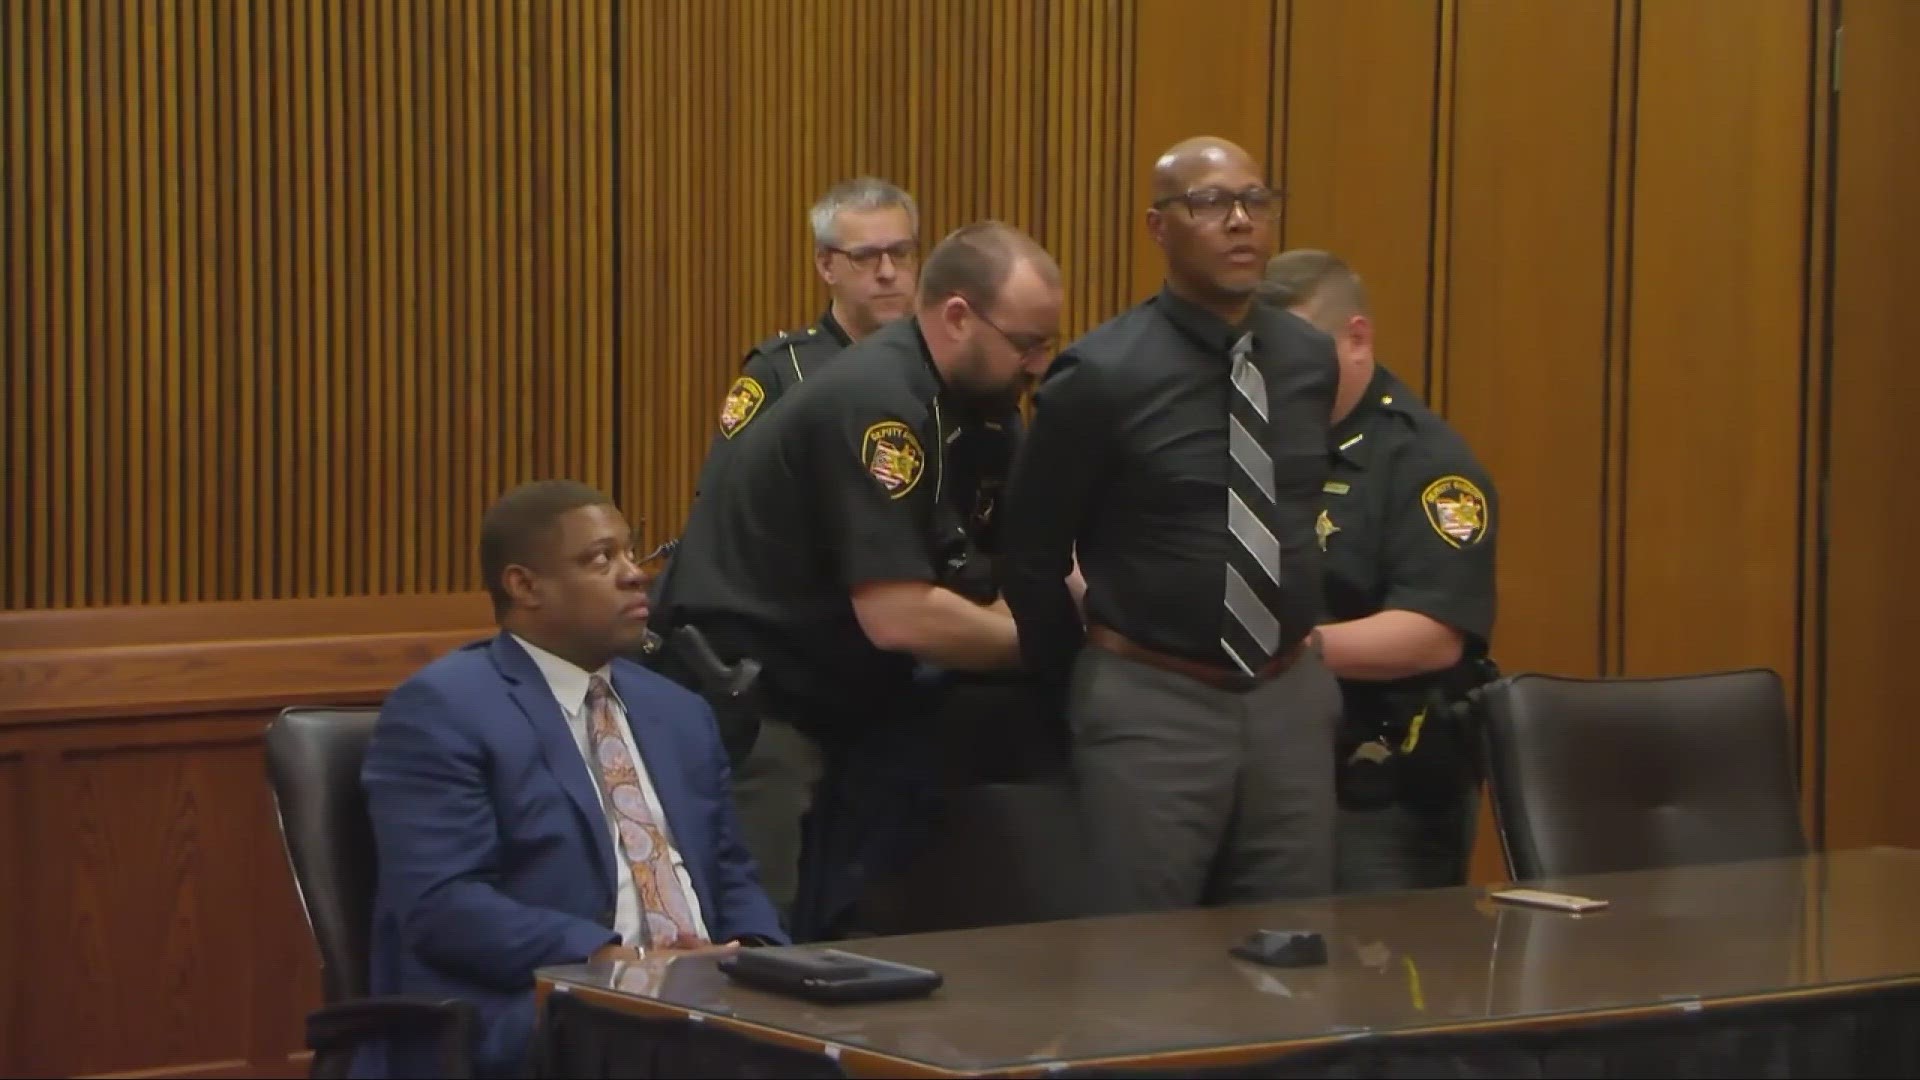 Terence Greene was found guilty on 65 counts involving the sexual assault of eight students between 1998 and 2019.